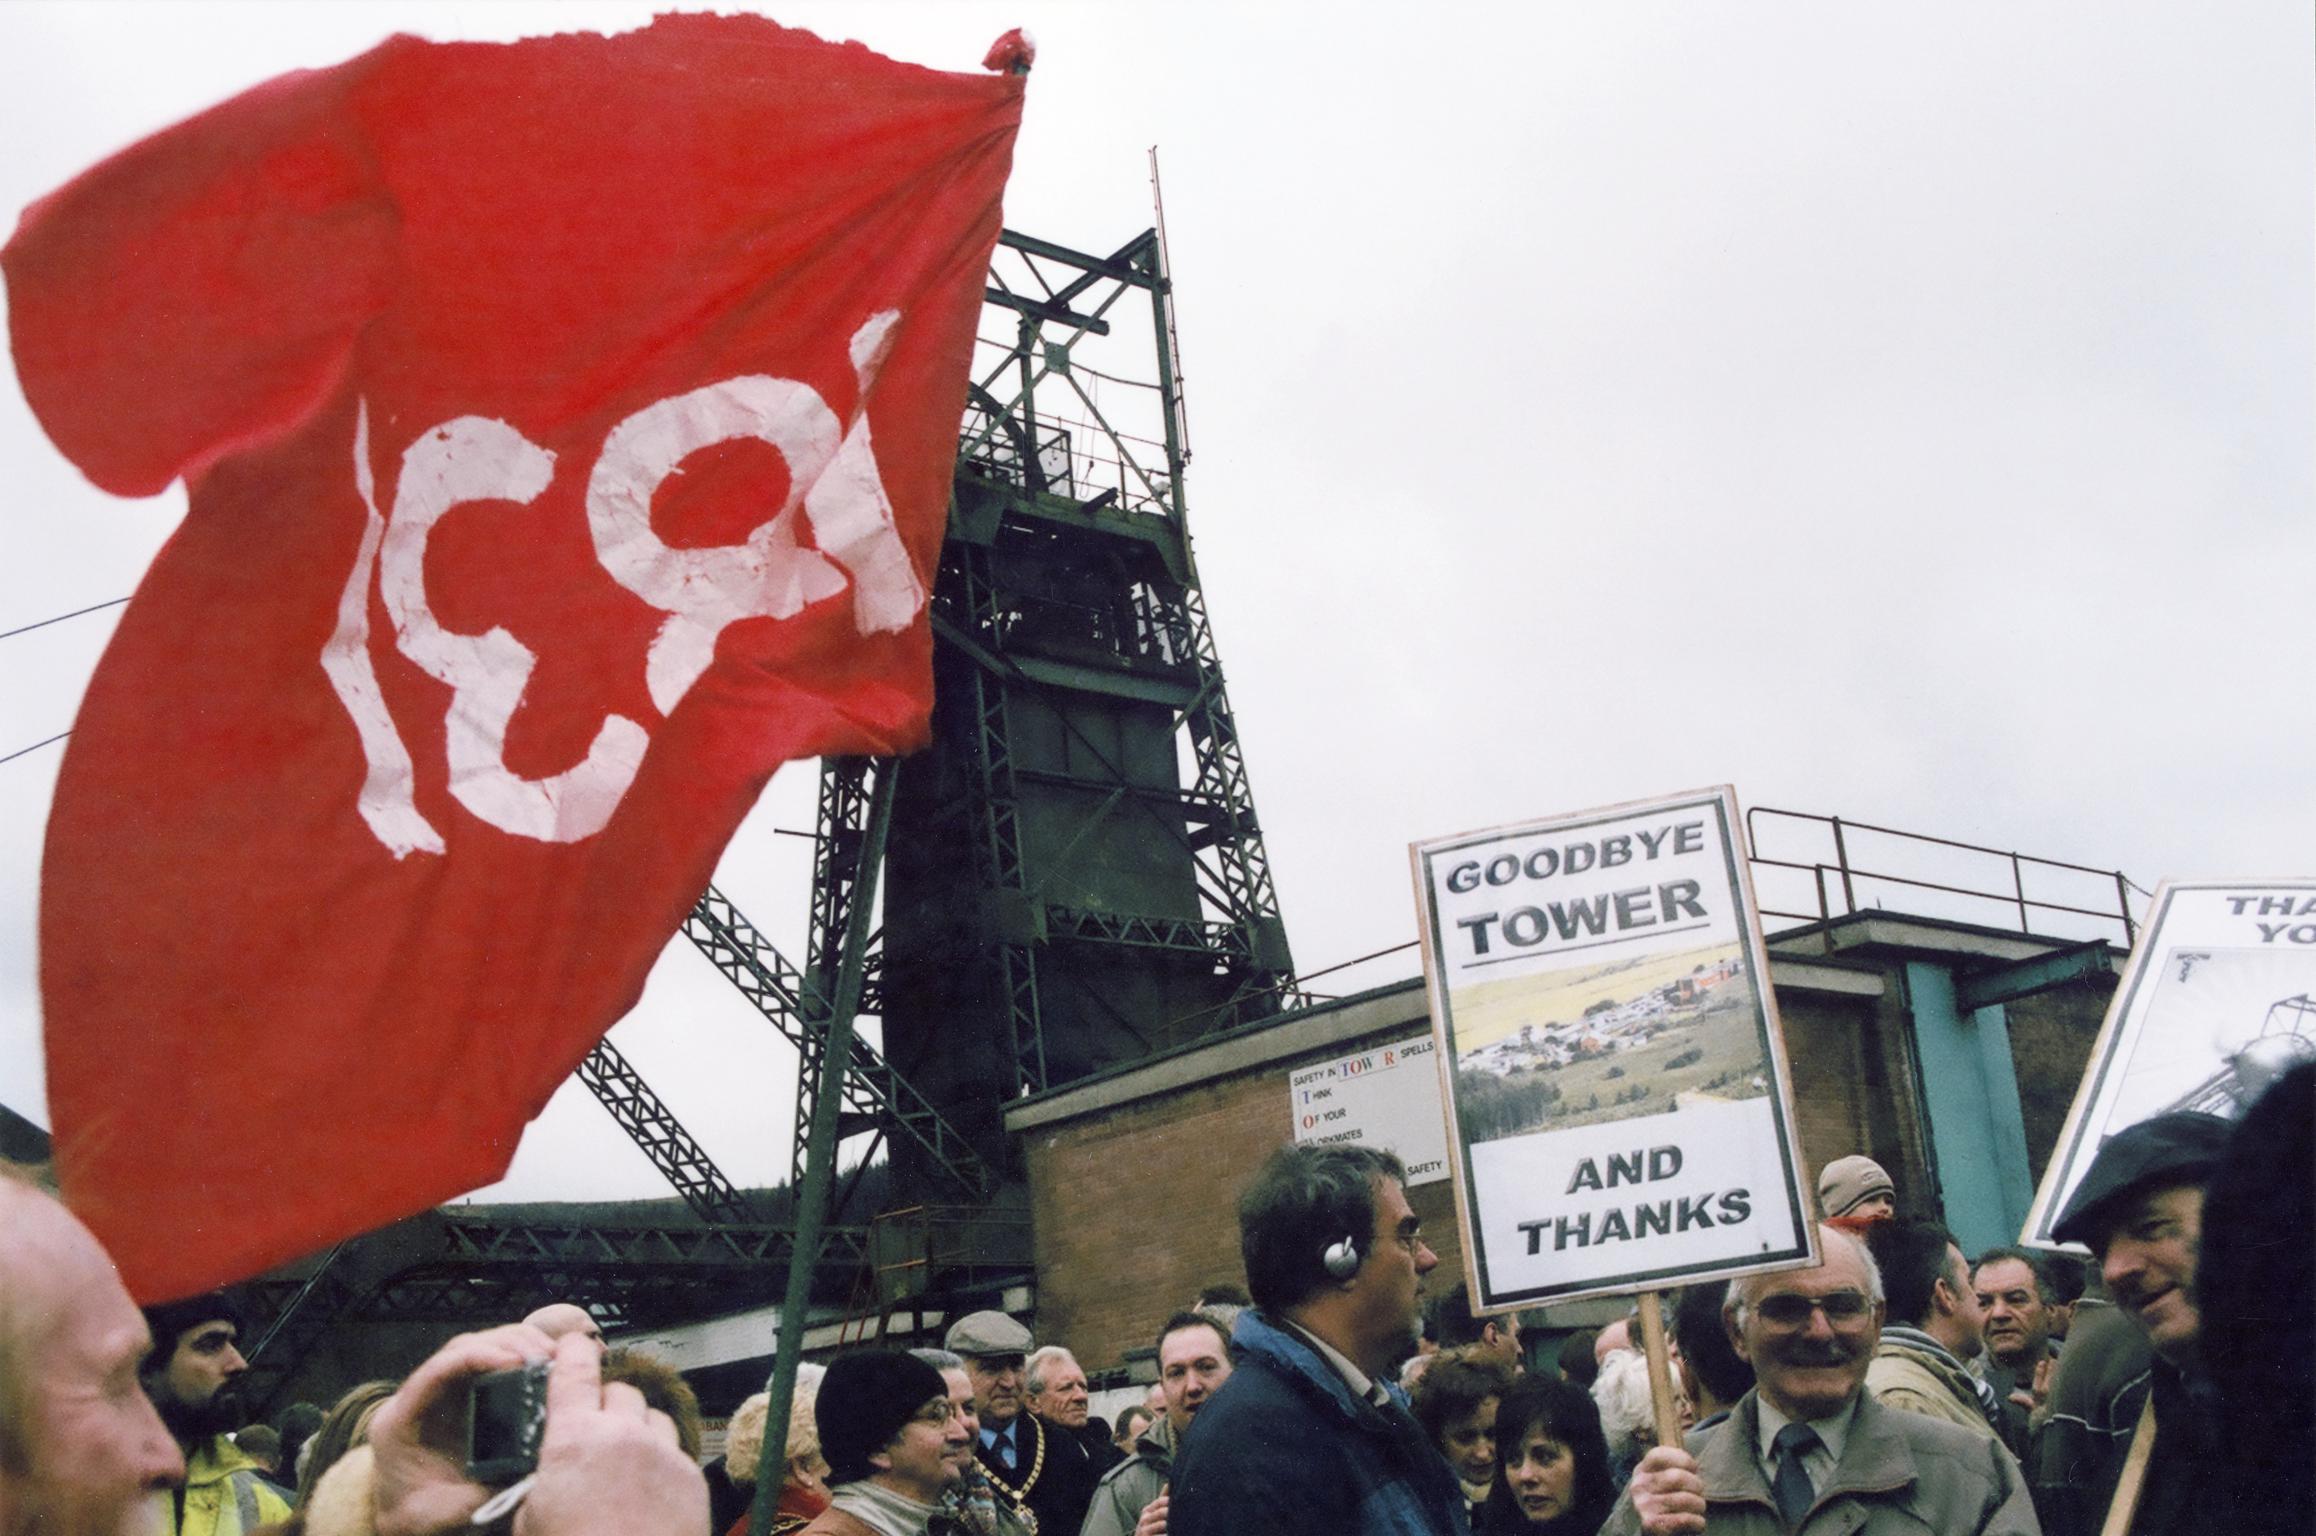 Tower Colliery, photograph